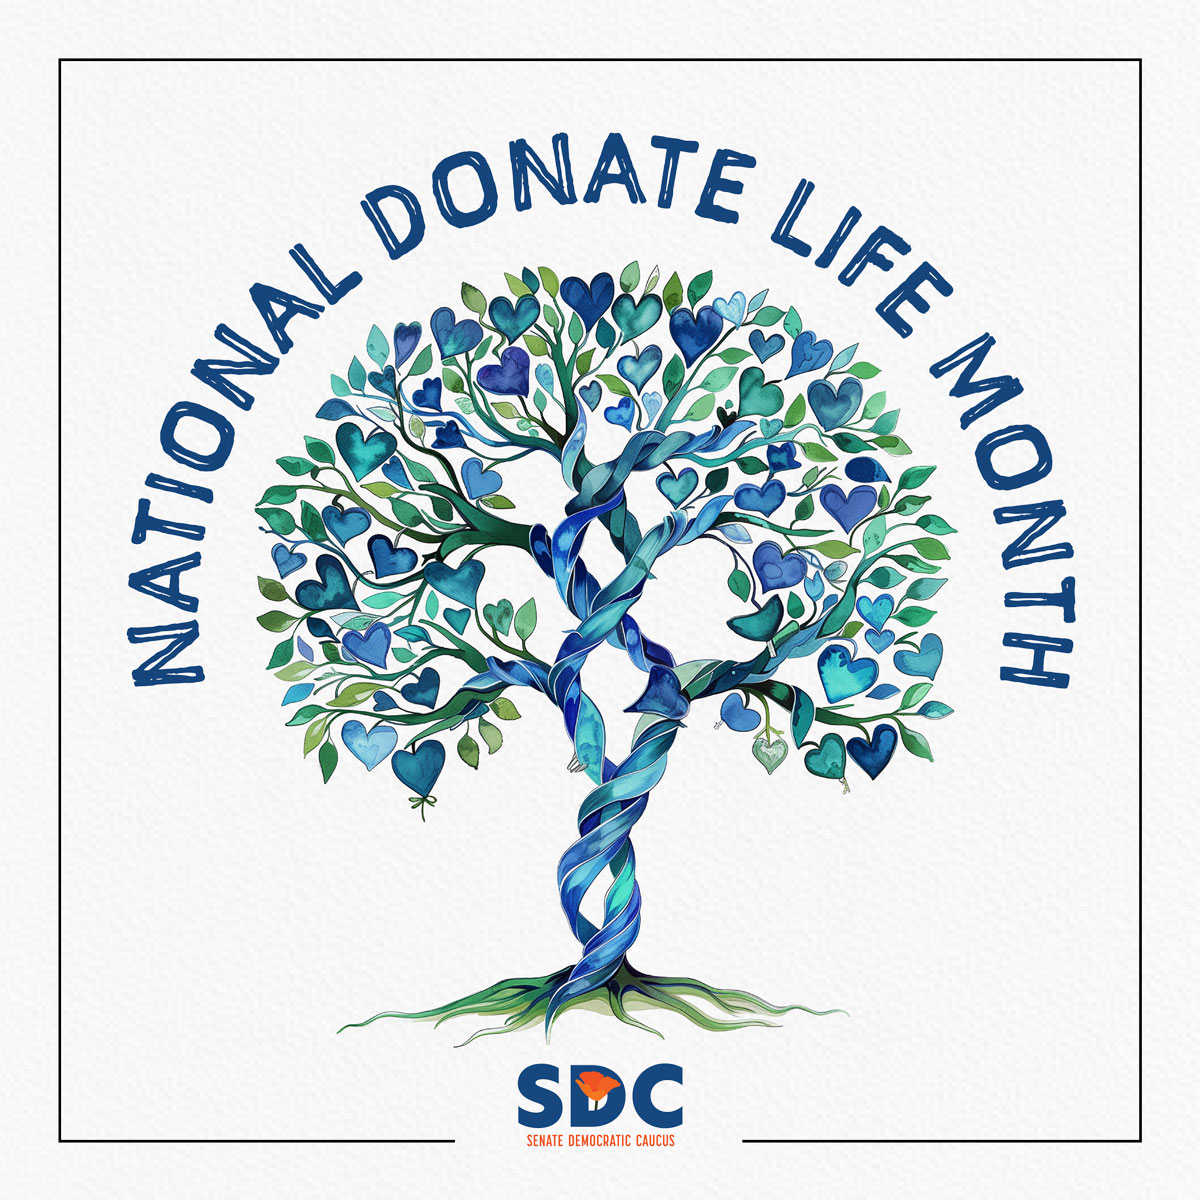 April is National Donate Life Month! Donating an organ is an extraordinary gift. In fact, each year, more than 100,000 Americans need a life-saving organ transplant. Consider becoming an organ donor and save a life.

#NationalDonateLifeMonth #April #OrganDonor